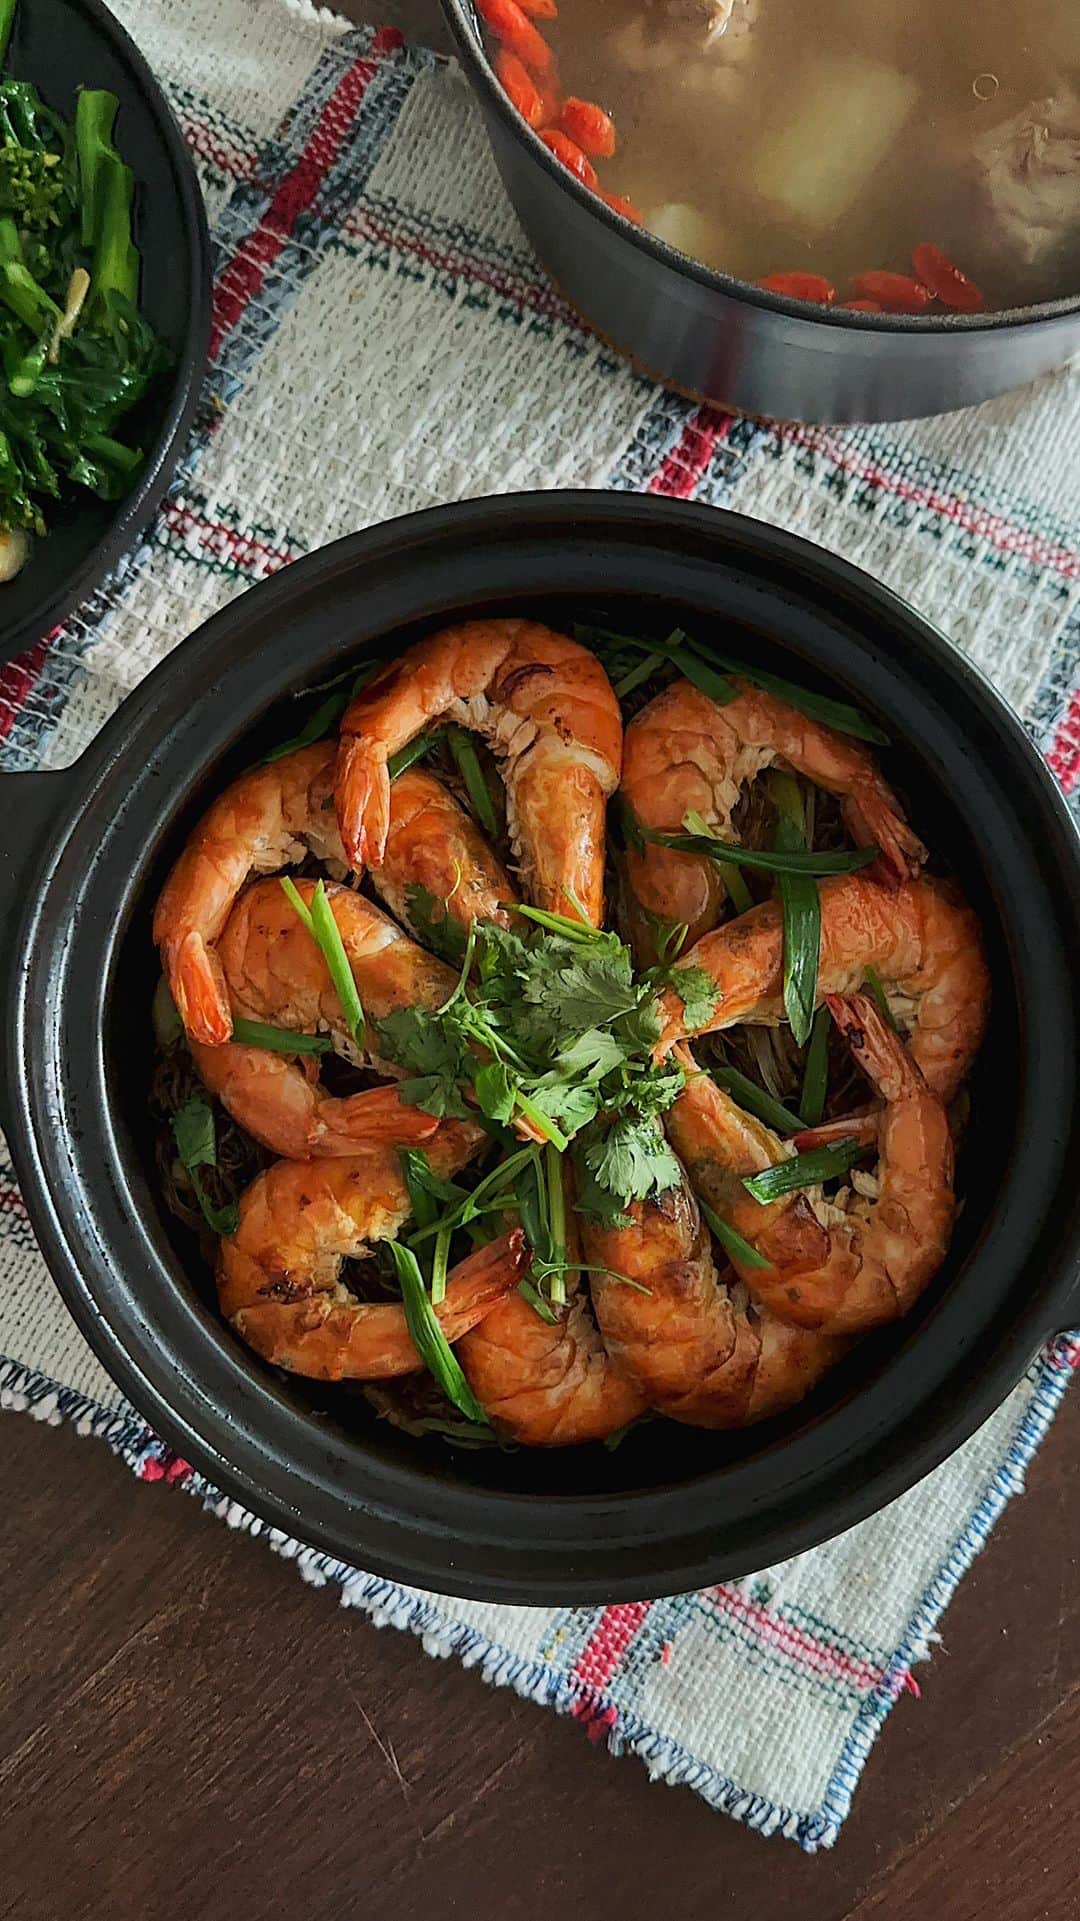 Samantha Leeのインスタグラム：「A simple yet delightful recipe for claypot prawns and glass noodles. This dish pairs perfectly with rice and various side dishes. #leesamantha #recipe   Ingredients: - 10 Large prawns - 150g glass noodles - 3 Coriander (divided) - 2 Spring onions (divided) - 8 Slices of ginger - 10 Cloves of garlic (halved) - 3 Tbsp Cooking oil - 2 Tbsp Shaoxing wine 2Tbsp Sesame oil  Sauce: - 2 Tbsp Oyster sauce - 2 Tbsp Soy sauce - 1.5 Tbsp Dark soy sauce - 1.5 Tbsp Fish sauce - 1 Tbsp Shaoxing wine - 1 tsp Sesame oil - 1 tsp White pepper - 1 Cup Water  Instructions: 1. Begin by cleaning, drying, and trimming the sharp edges of the prawns. 2. Soak the glass noodles in warm water for 10 minutes, then drain them. 3. In a small bowl, combine the oyster sauce, soy sauce, dark soy sauce, Shaoxing wine, white pepper, sesame oil and water. 4. Heat up a claypot over medium-high heat and add 3 tbsp of oil. Add the prawns and cook each side for approximately 40 seconds. Set them aside. 5. Reduce the heat to medium and stir in the ginger, garlic, divided coriander roots, and the white part of the spring onions. Fry until fragrant. 6. Add the glass noodles and half of the sauce mixture. Mix everything thoroughly. 7. Cover the pot with a lid and cook for 2 minutes. 8. Pour in the remaining sauce mixture, along with some chopped coriander, spring onions, and the cooked prawns. Drizzle in some Shaoxing wine. 9. Cover the pot again and cook for another 2 minutes. 10. Finish by drizzling a bit of sesame oil before serving. Enjoy your dish!」